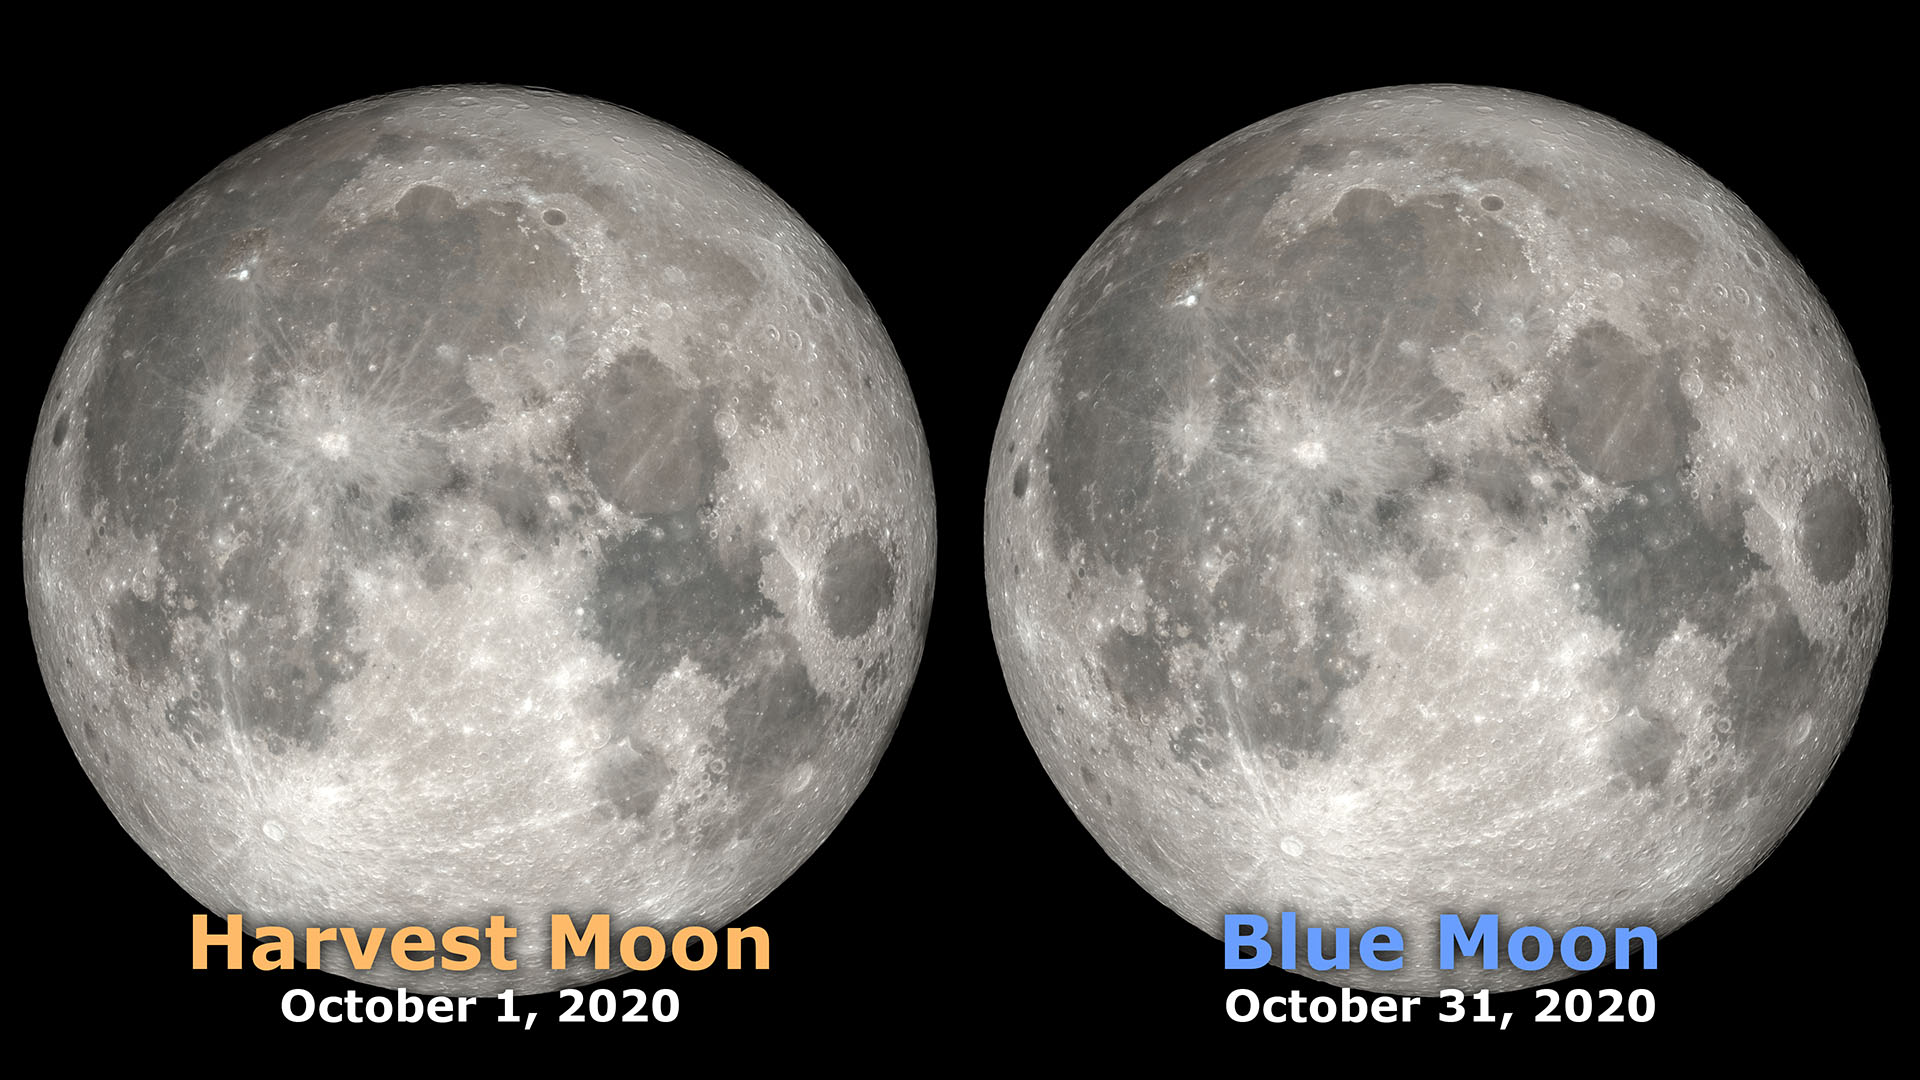 A still image of the two Full Moons in October of 2020, with labels.